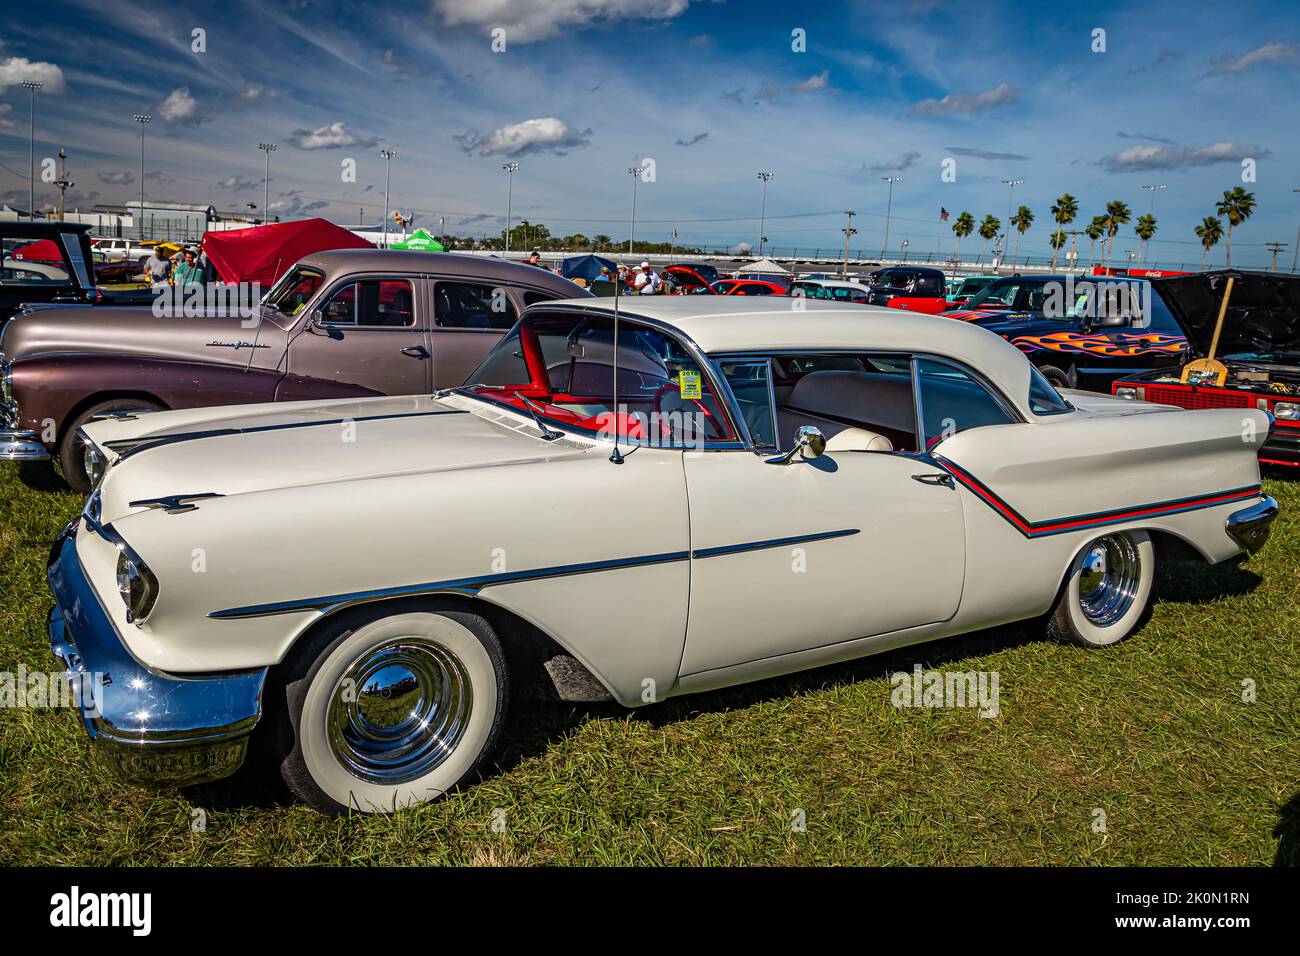 Daytona Beach, FL - November 24, 2018: High perspective side view of a 1957 Oldsmobile Golden Rocket 88 Holiday Hardtop Coupe at a local car show. Stock Photo